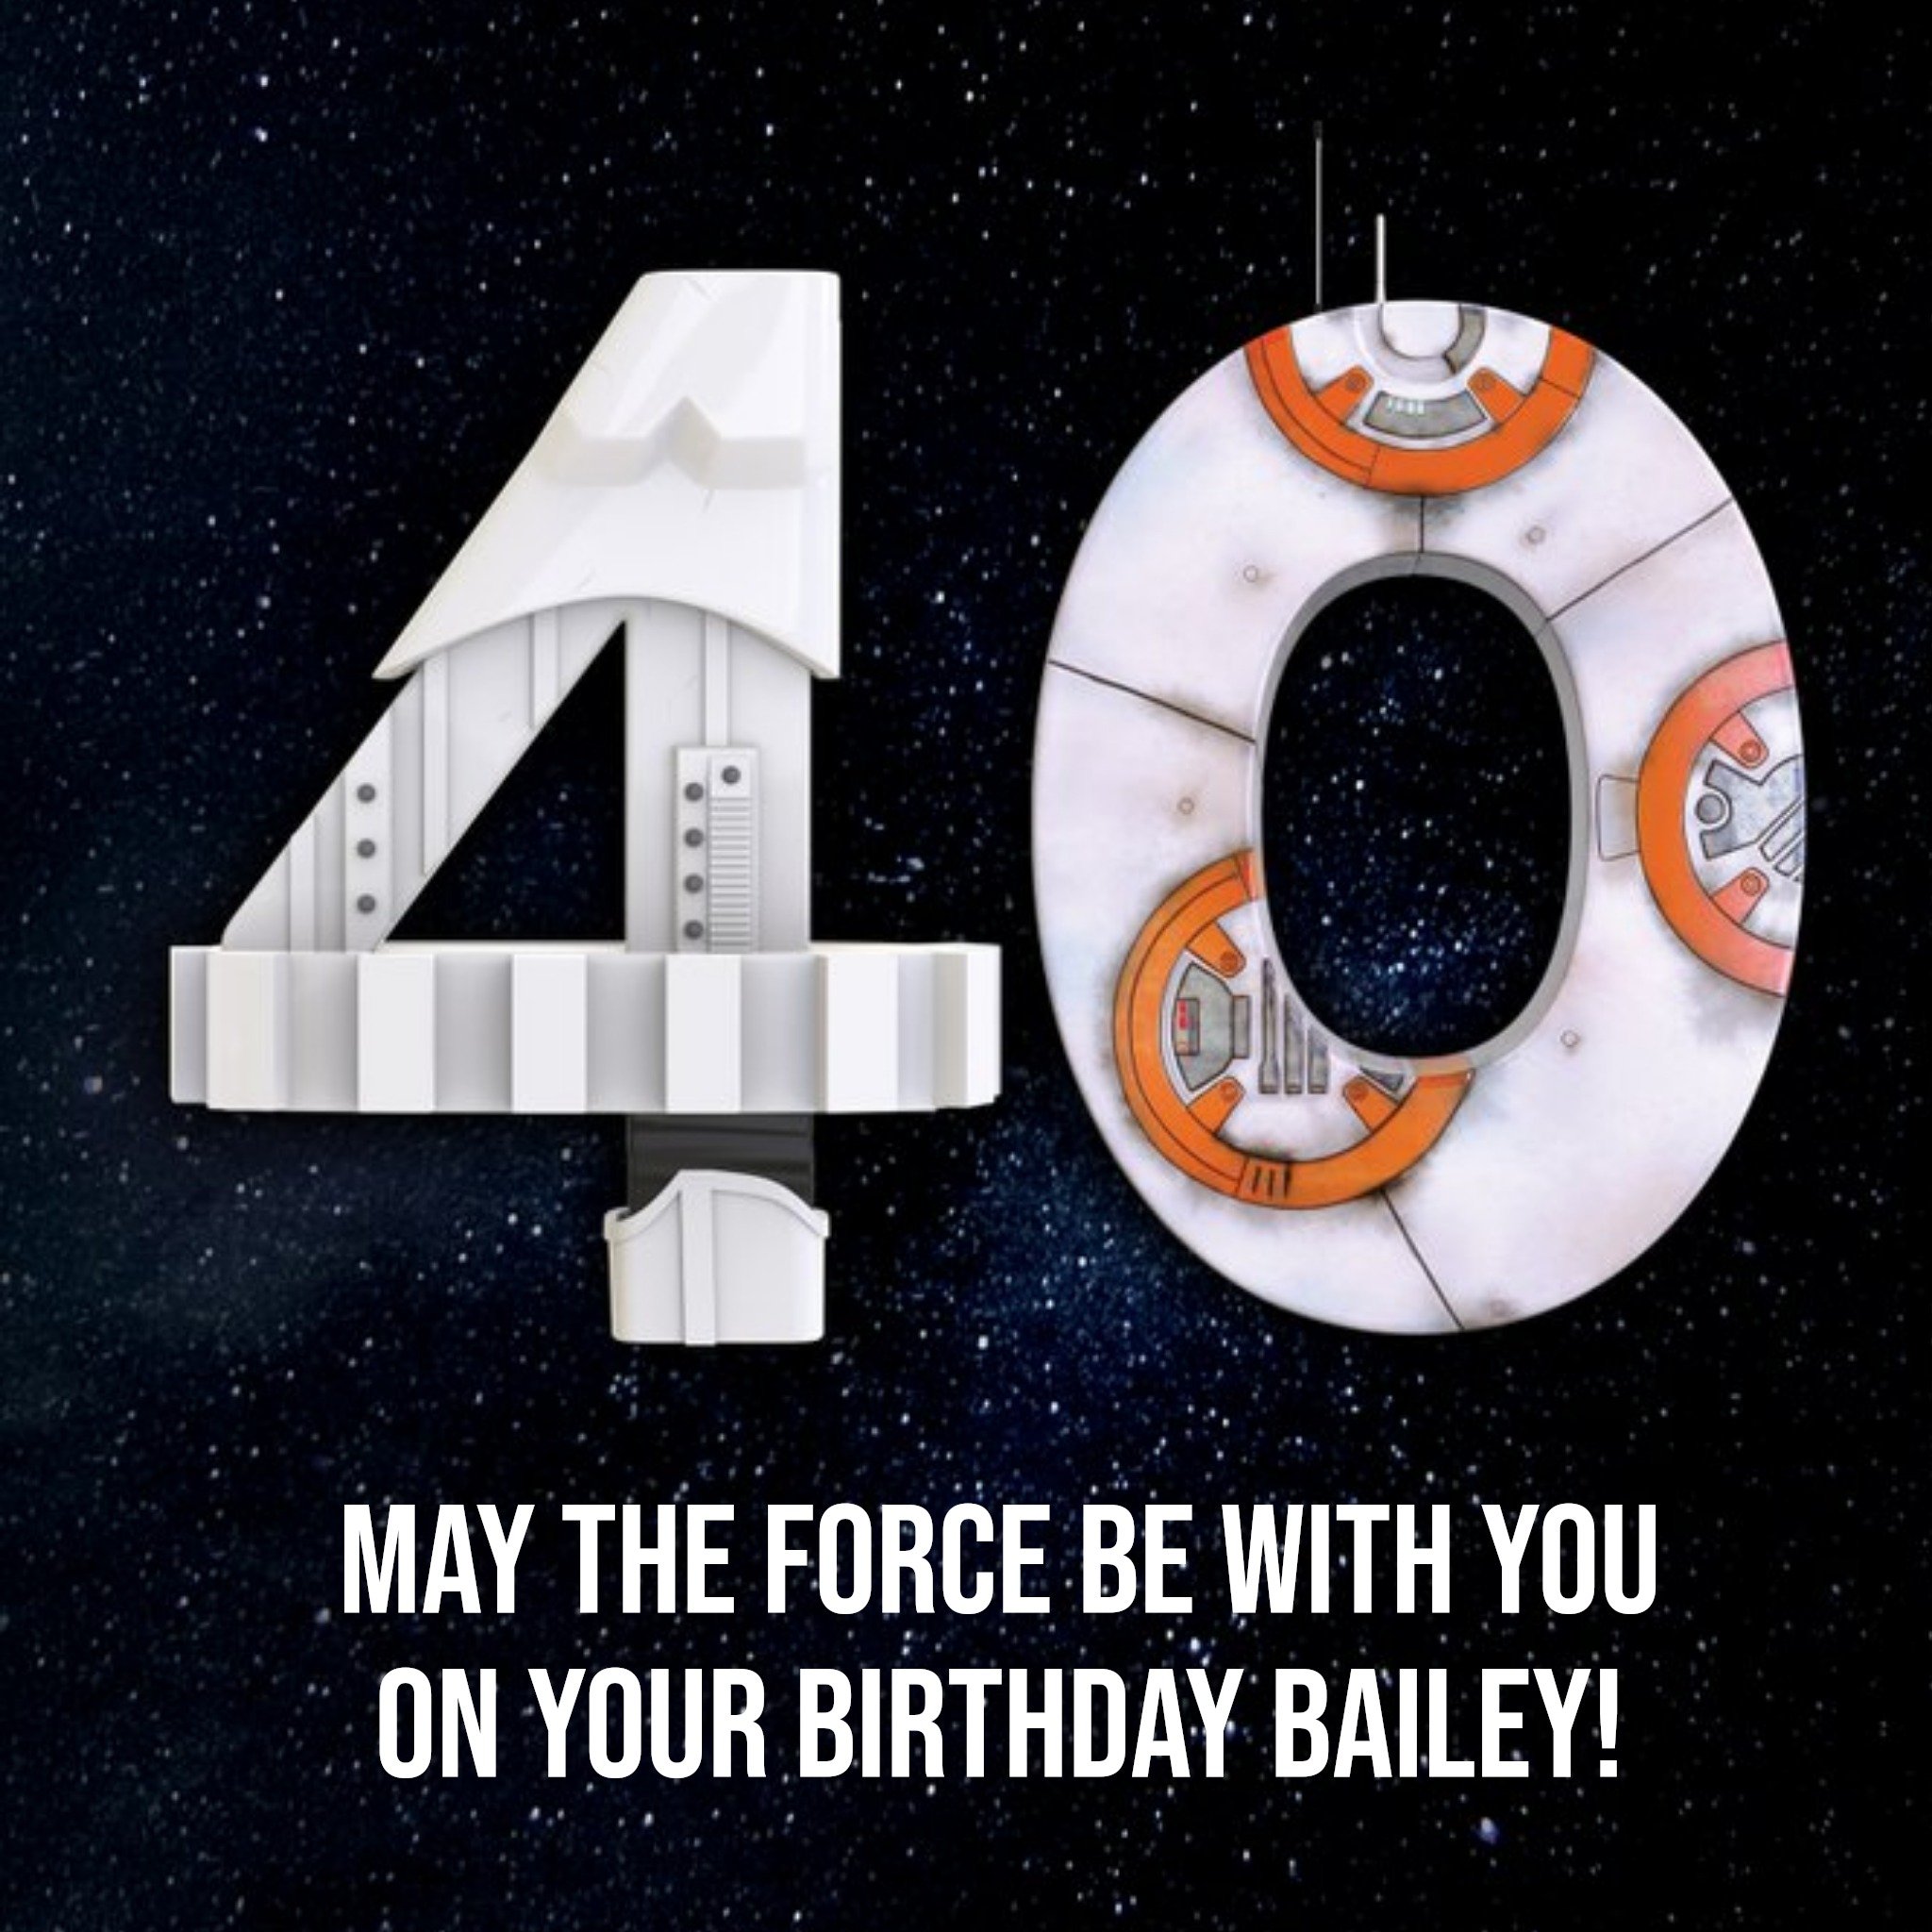 Disney Star Wars May the Force Be With You 40th Birthday Card, Square